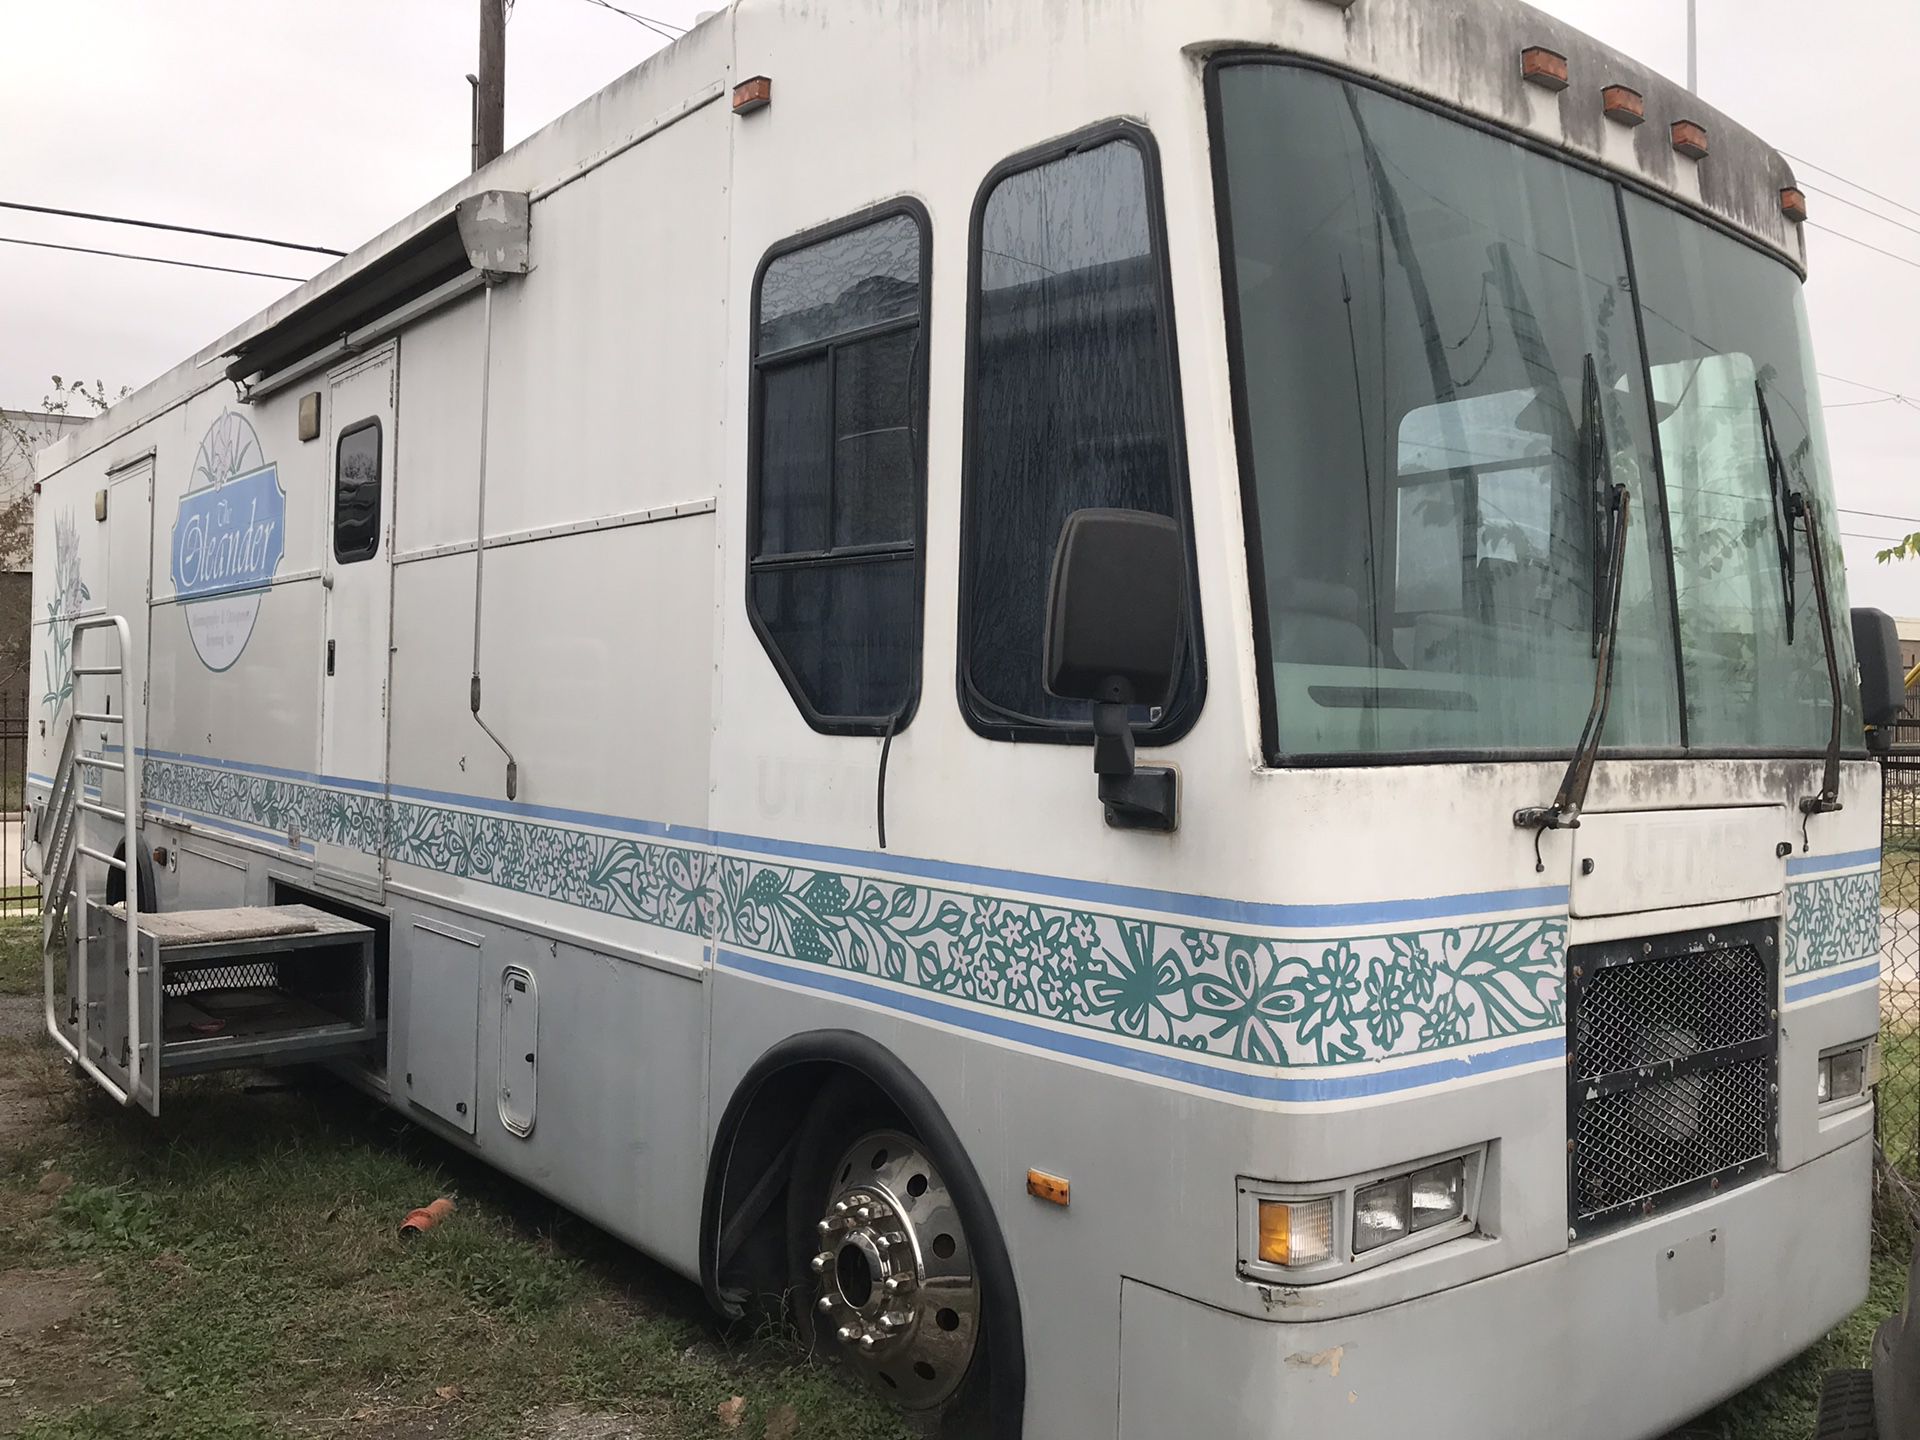 Mobile doctors office. pusherConvert to mobile kitchen